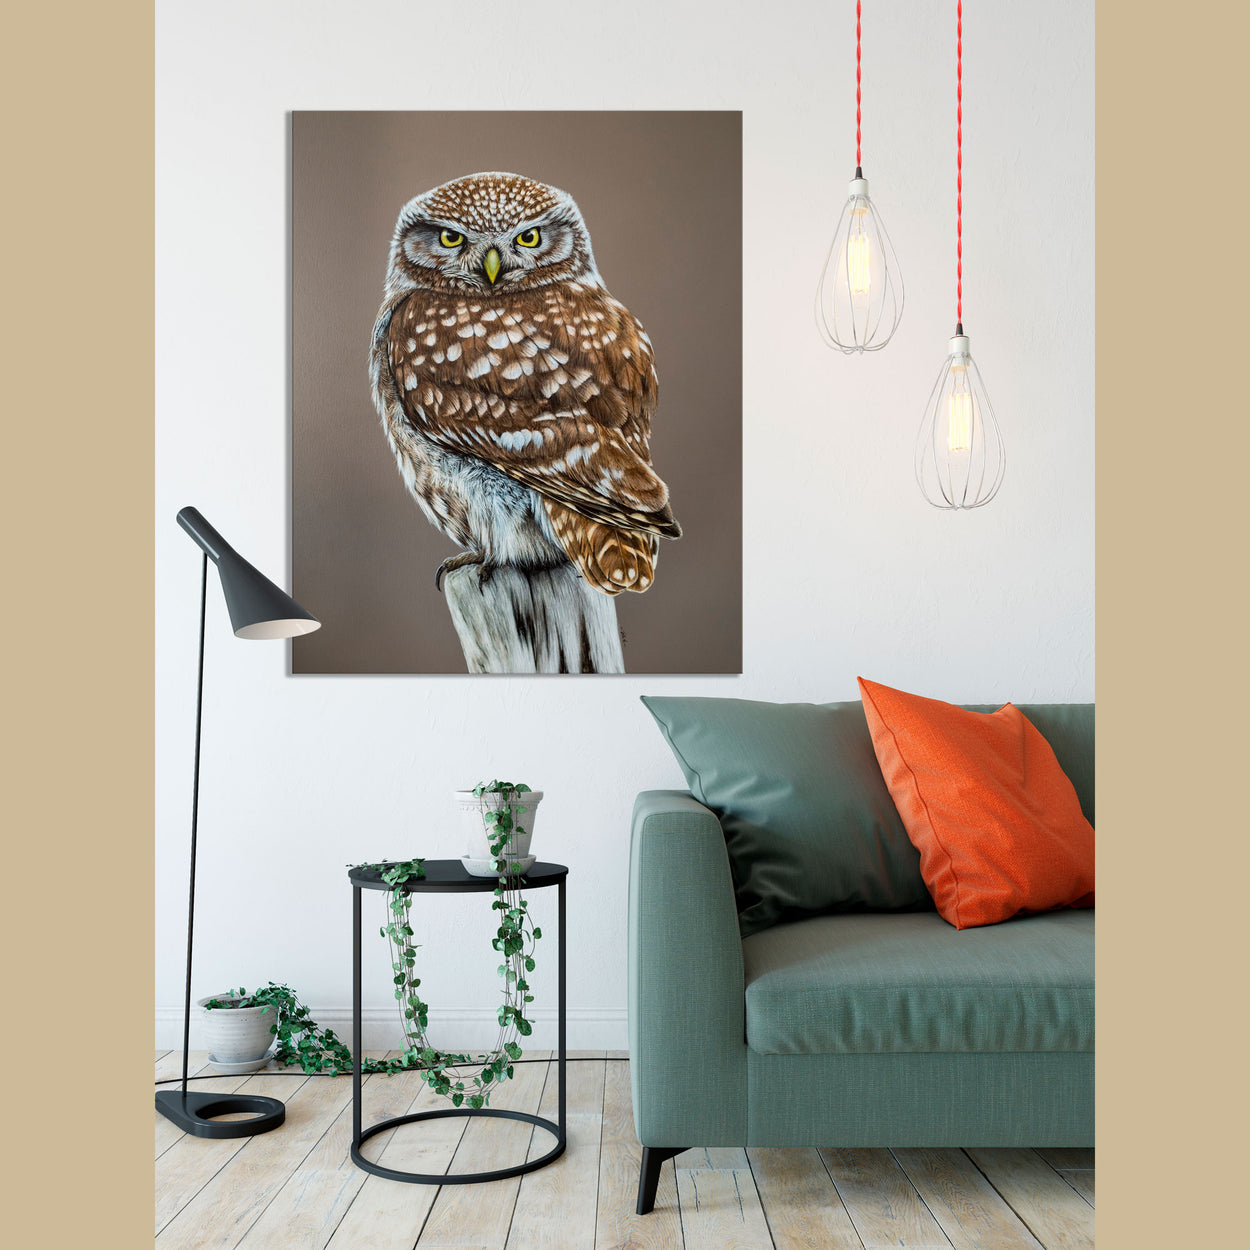 Painting of a little owl on a canvas on a white wall in a room with a sofa, table and lamps